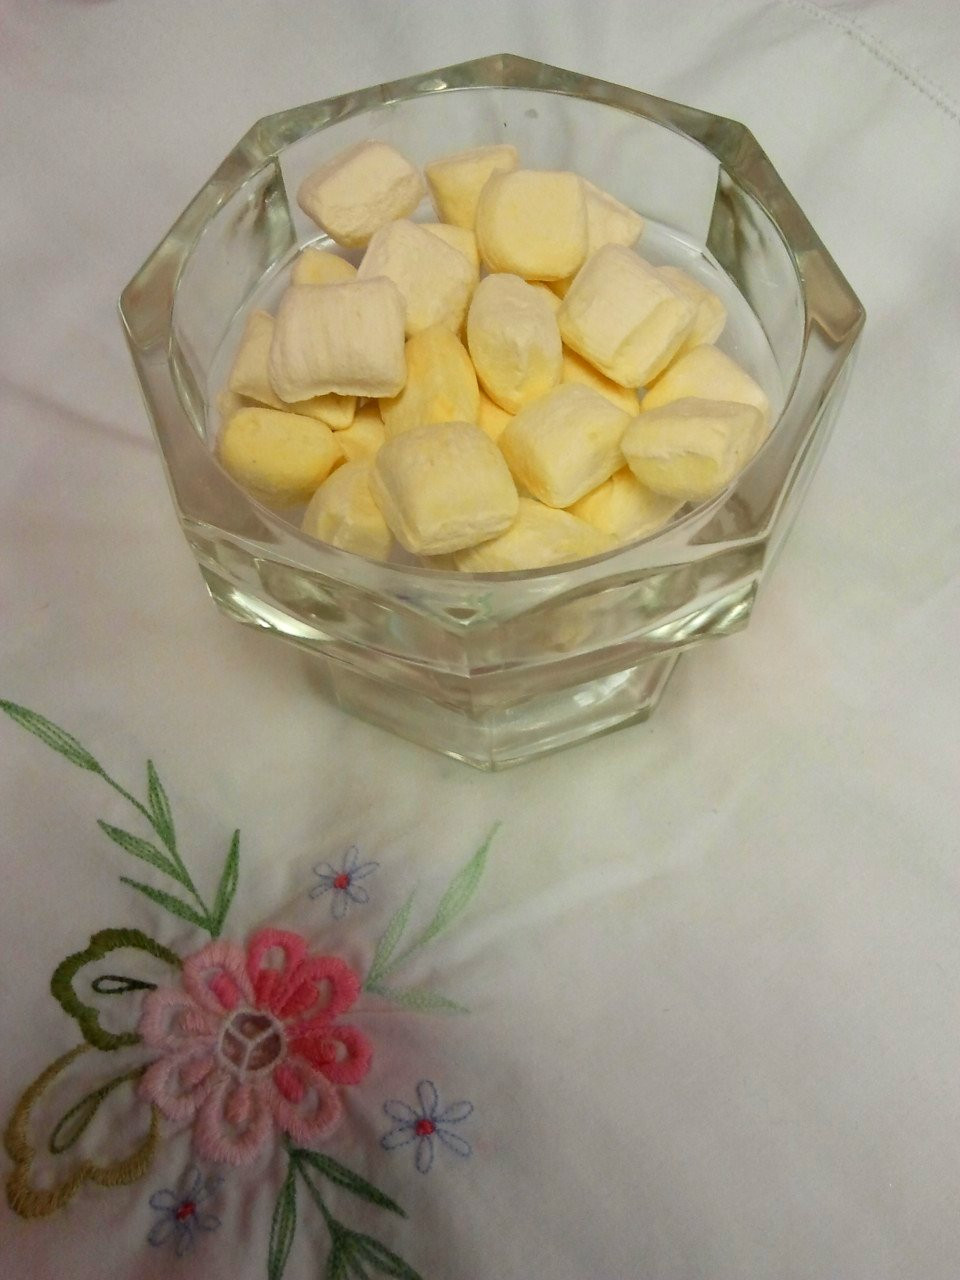 Ministry of Candies - Flavours Miniature Marshmallows (Pink & White) H